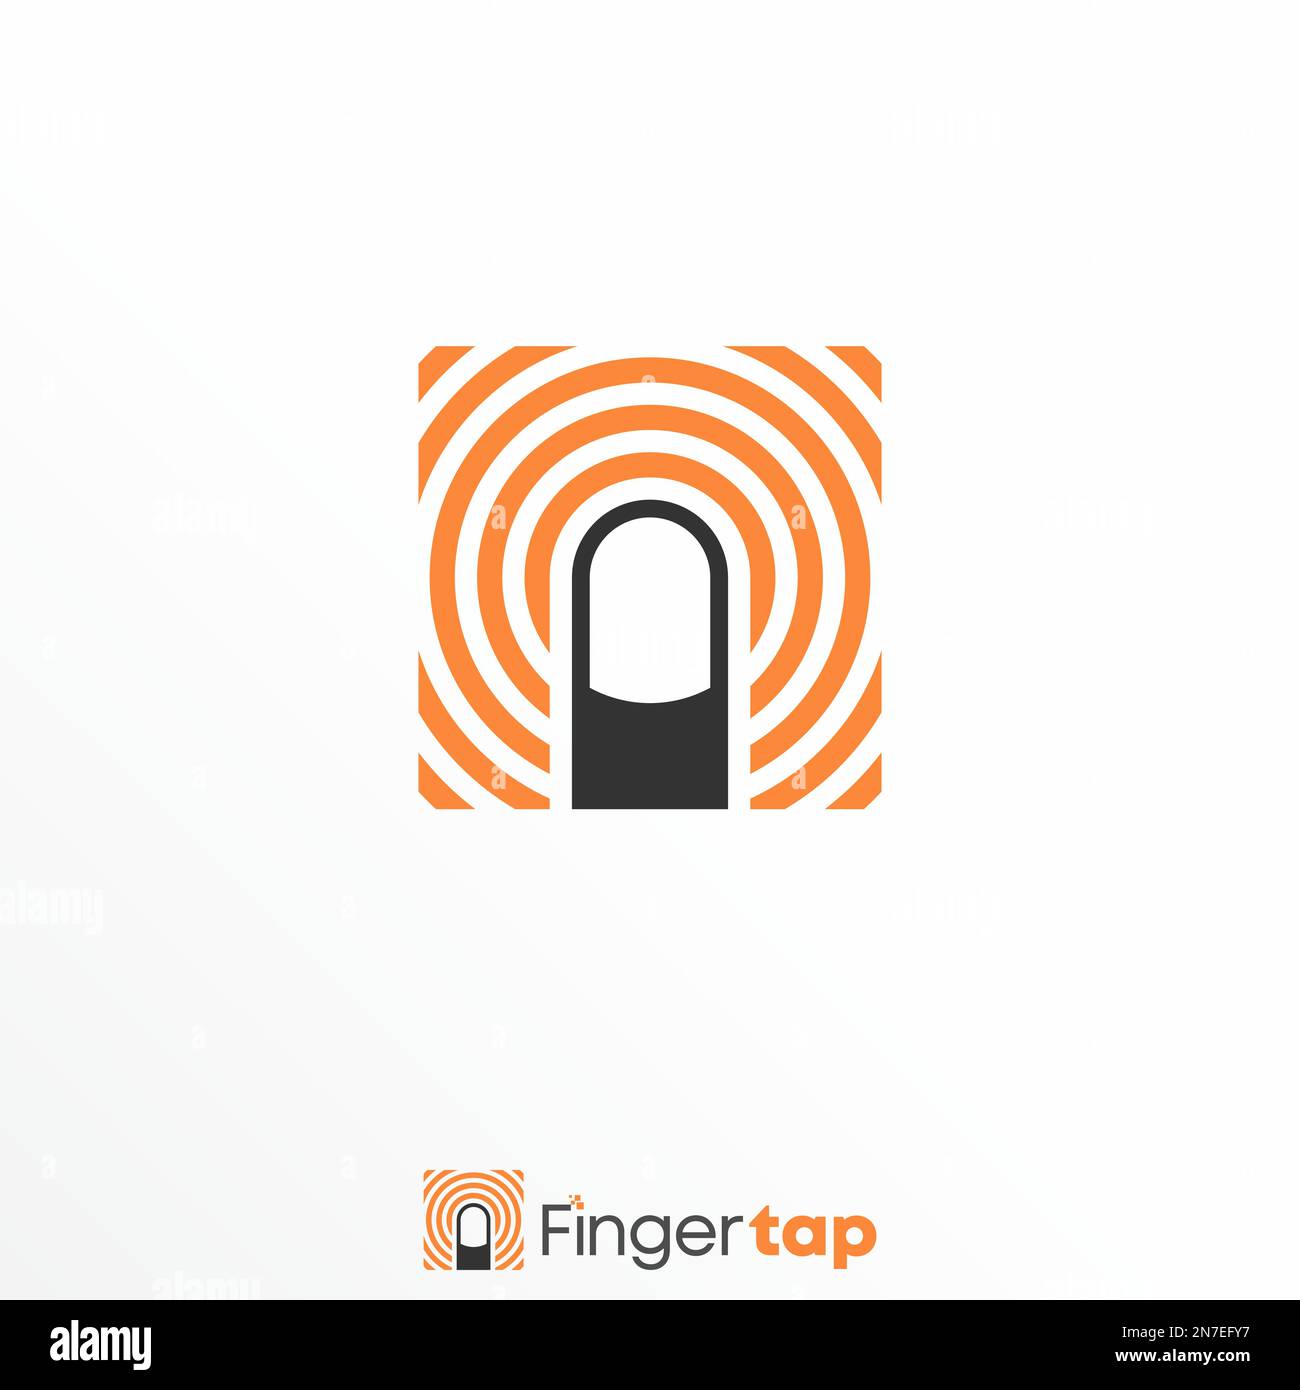 Index finger in Touch with line circle around image graphic icon logo design abstract concept vector stock. used as a symbol related to Finger print Stock Vector